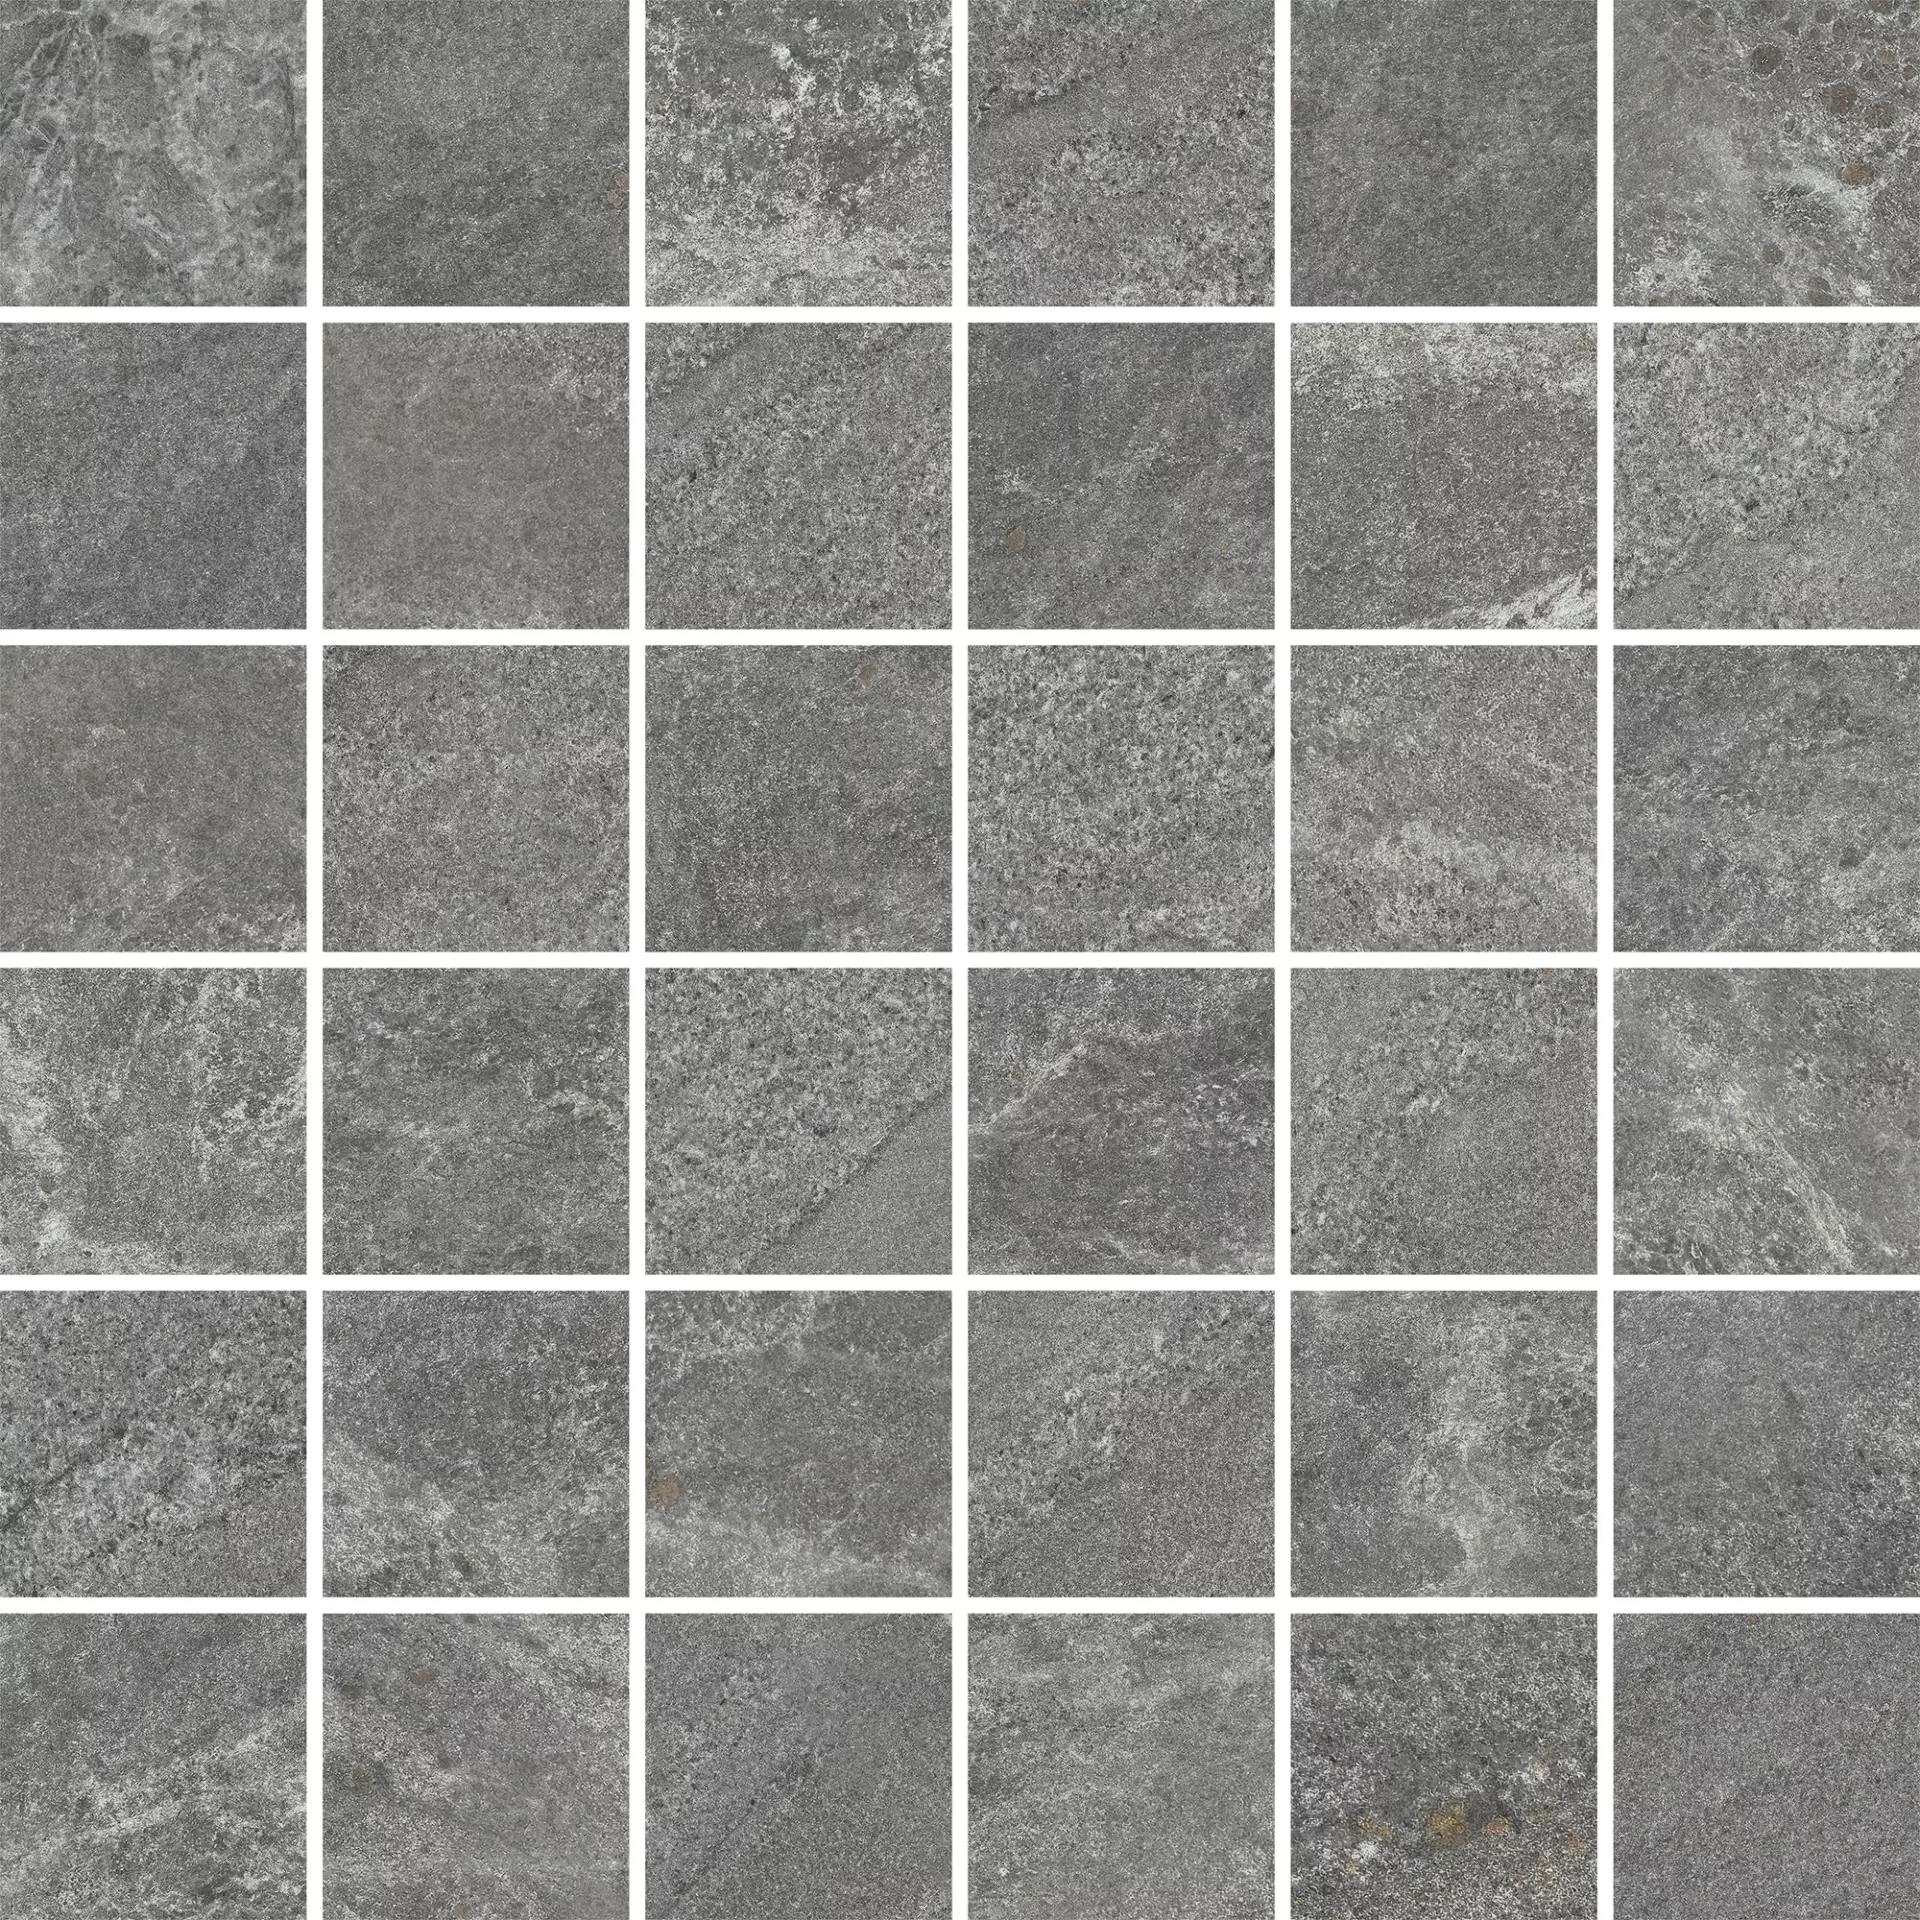 Panaria The Place Suburb Grey Antibacterial - Naturale Mosaic 36 Pezzi PGZP9M2 30x30cm rectified 9mm